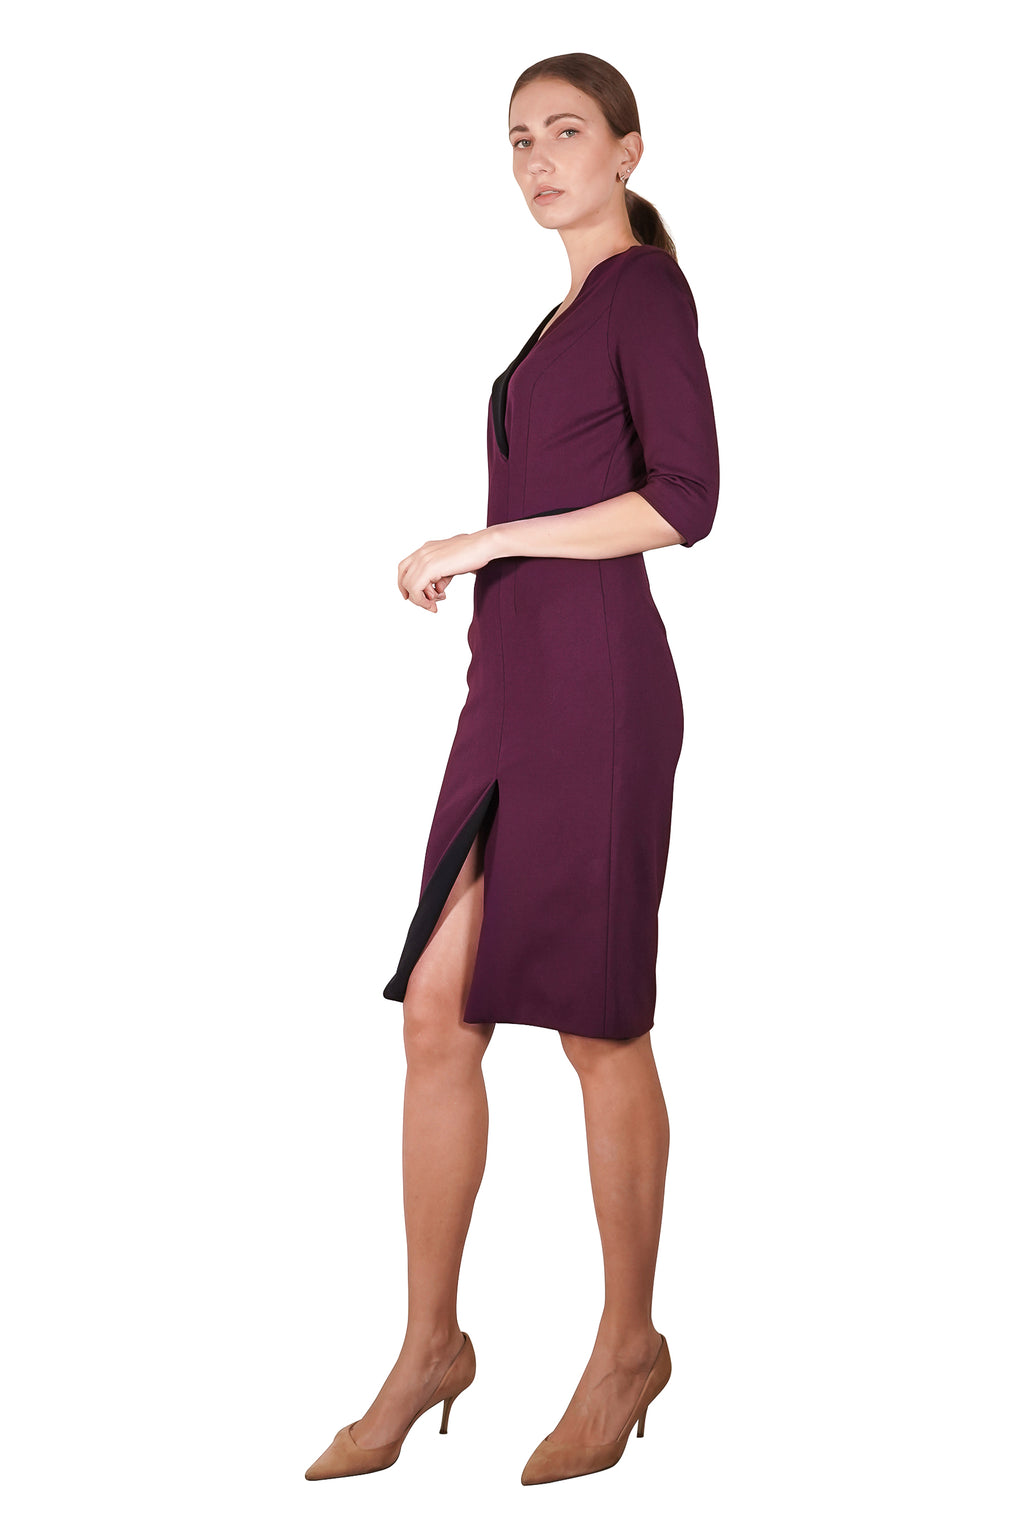 Alexia 2-Toned Dress (Mid-Sleeves)